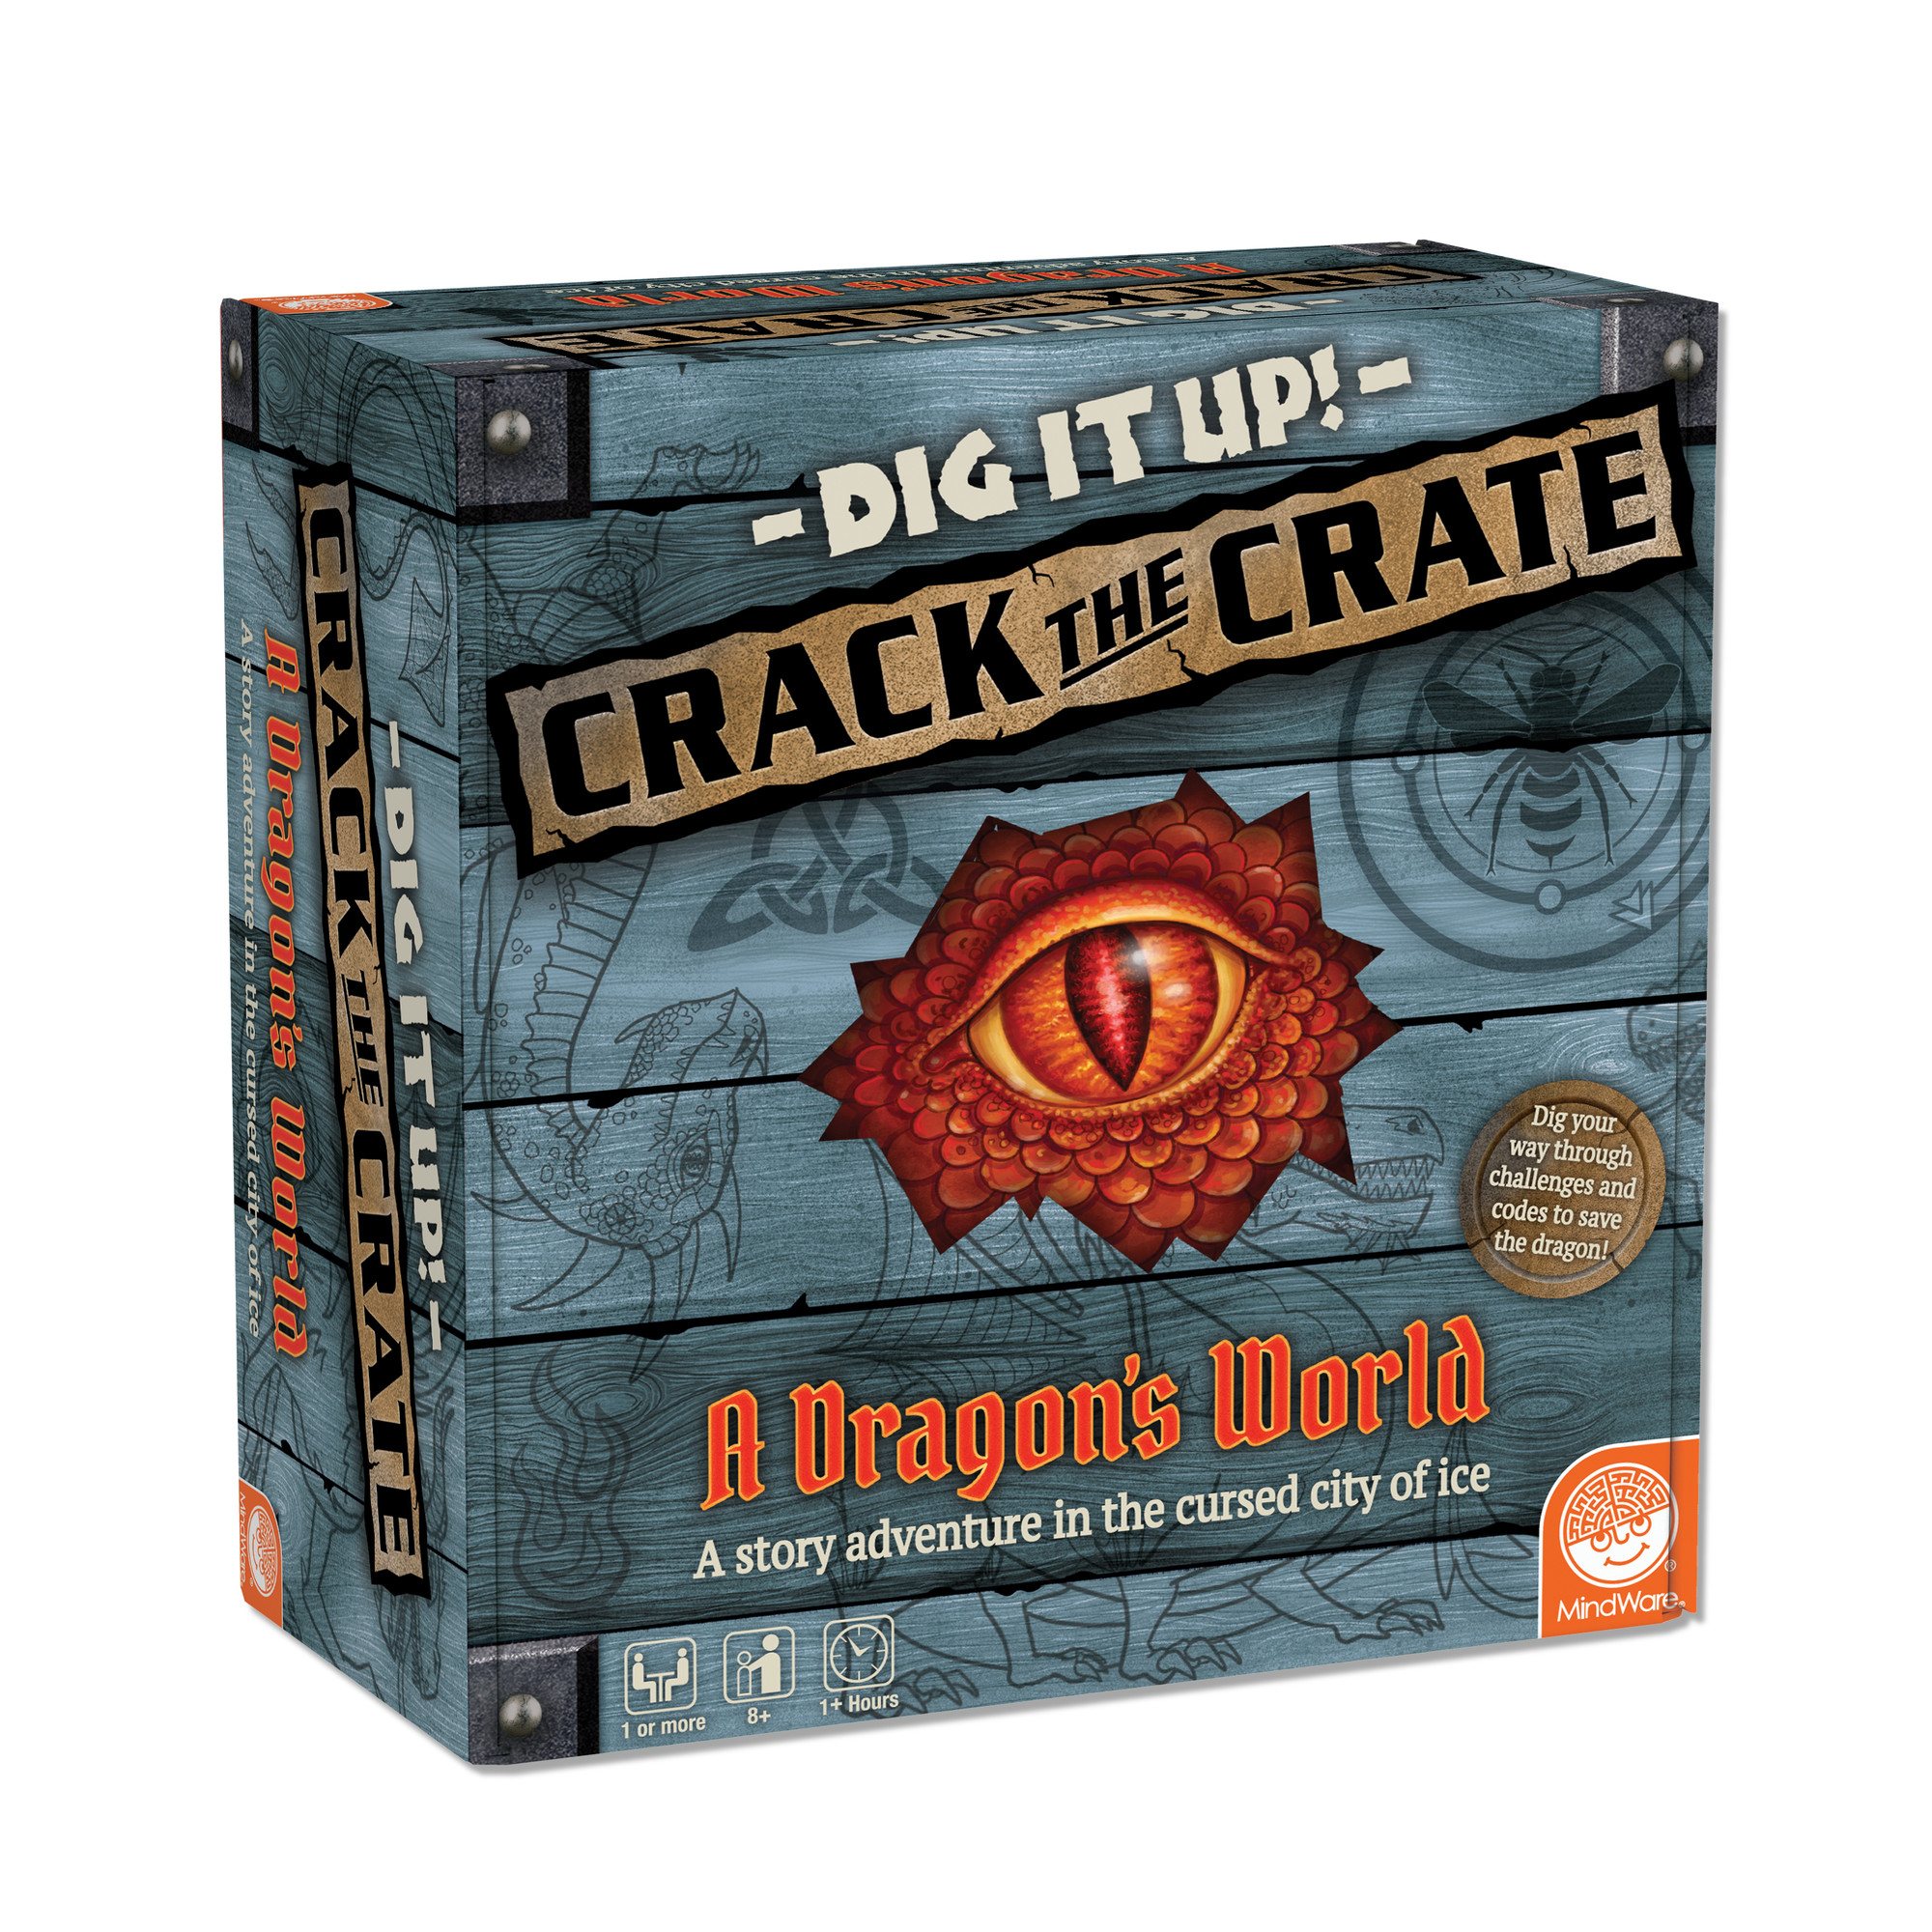 MindWare Dig It Up! Crack the Crate - A Story Adventure in the Cursed City of Ice for Kids - 1 or More Players - Ages 8+ - image 1 of 6